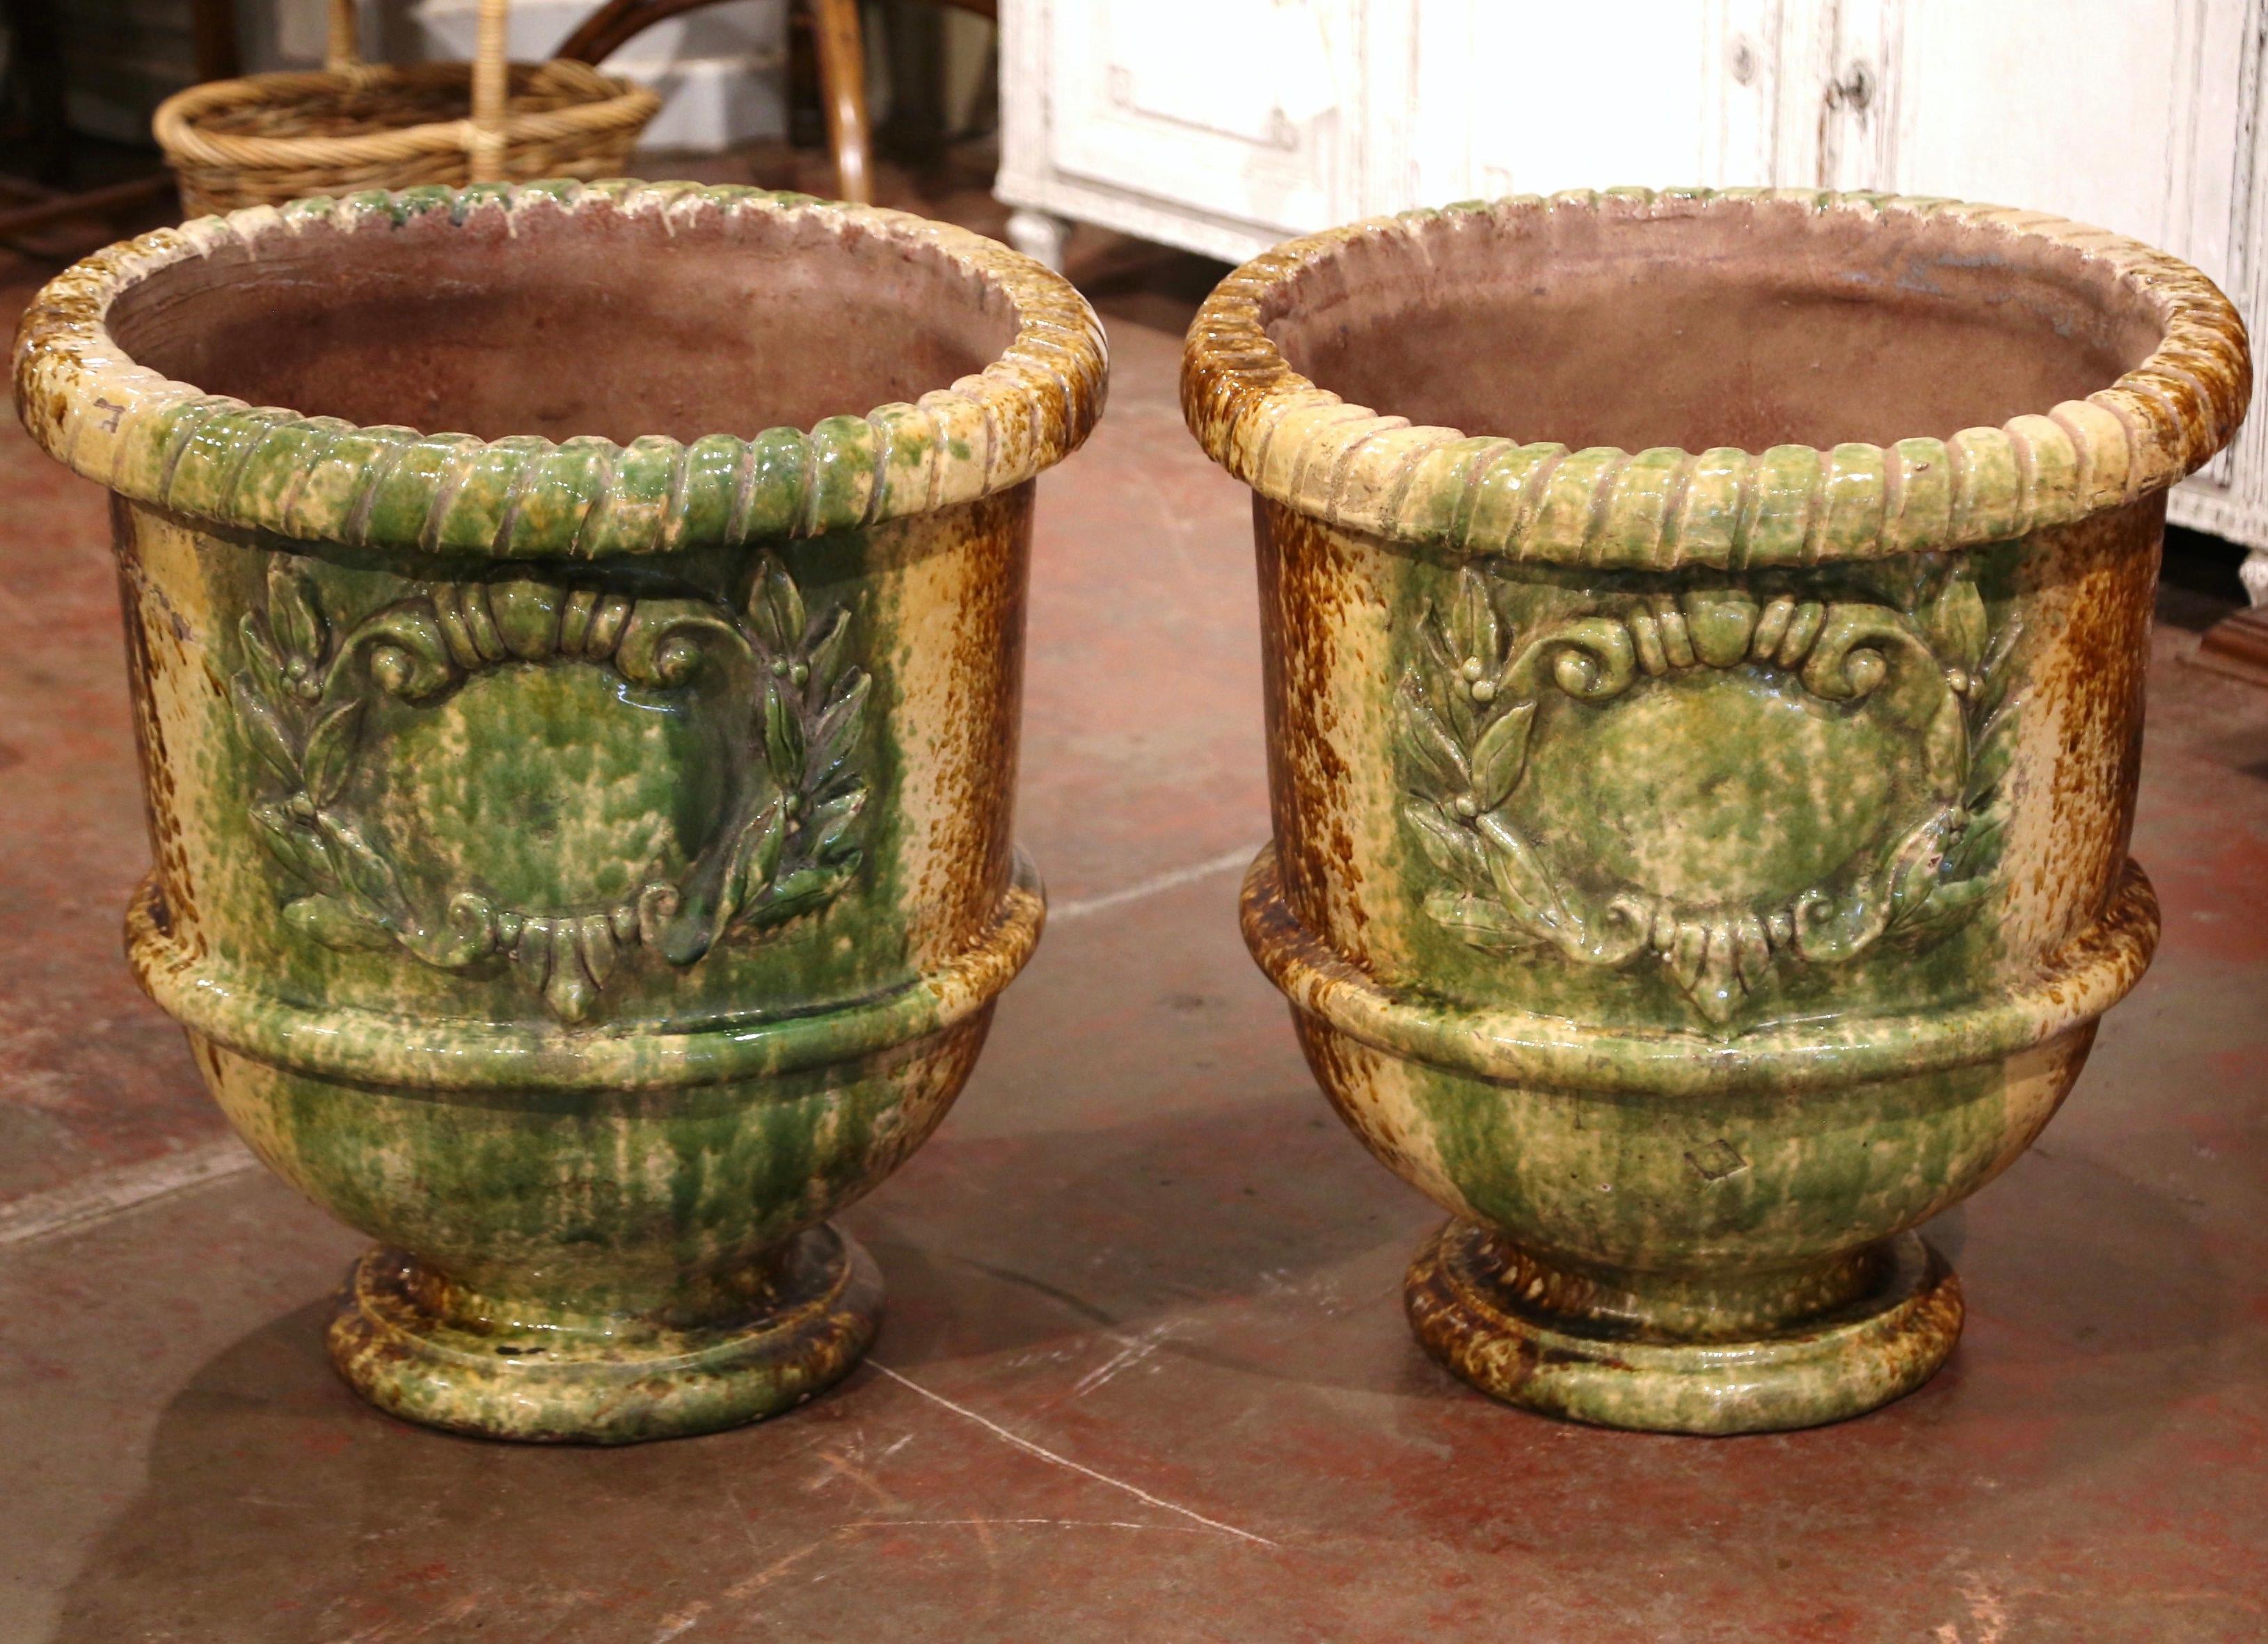 These large, colorful pots were created near Anduze, France, circa 1990. Each classic earthenware planter features carved decor with a glazed finish in the Provençal green and mustard finish. The important pots are in excellent condition with a rich